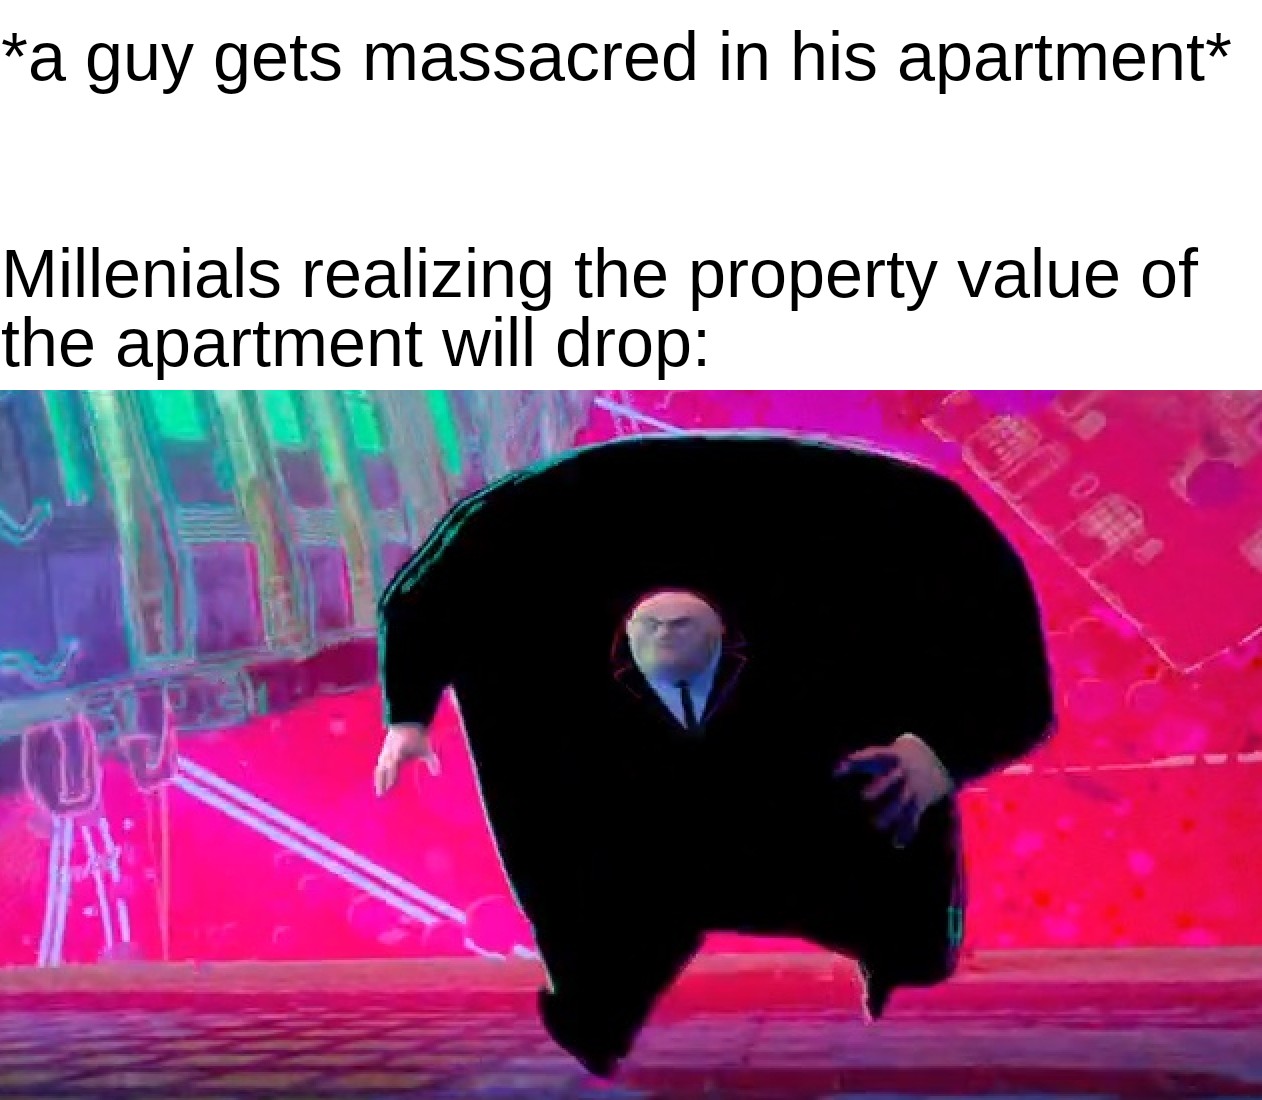 relatable minecraft meme - a guy gets massacred in his apartment Millenials realizing the property value of the apartment will drop